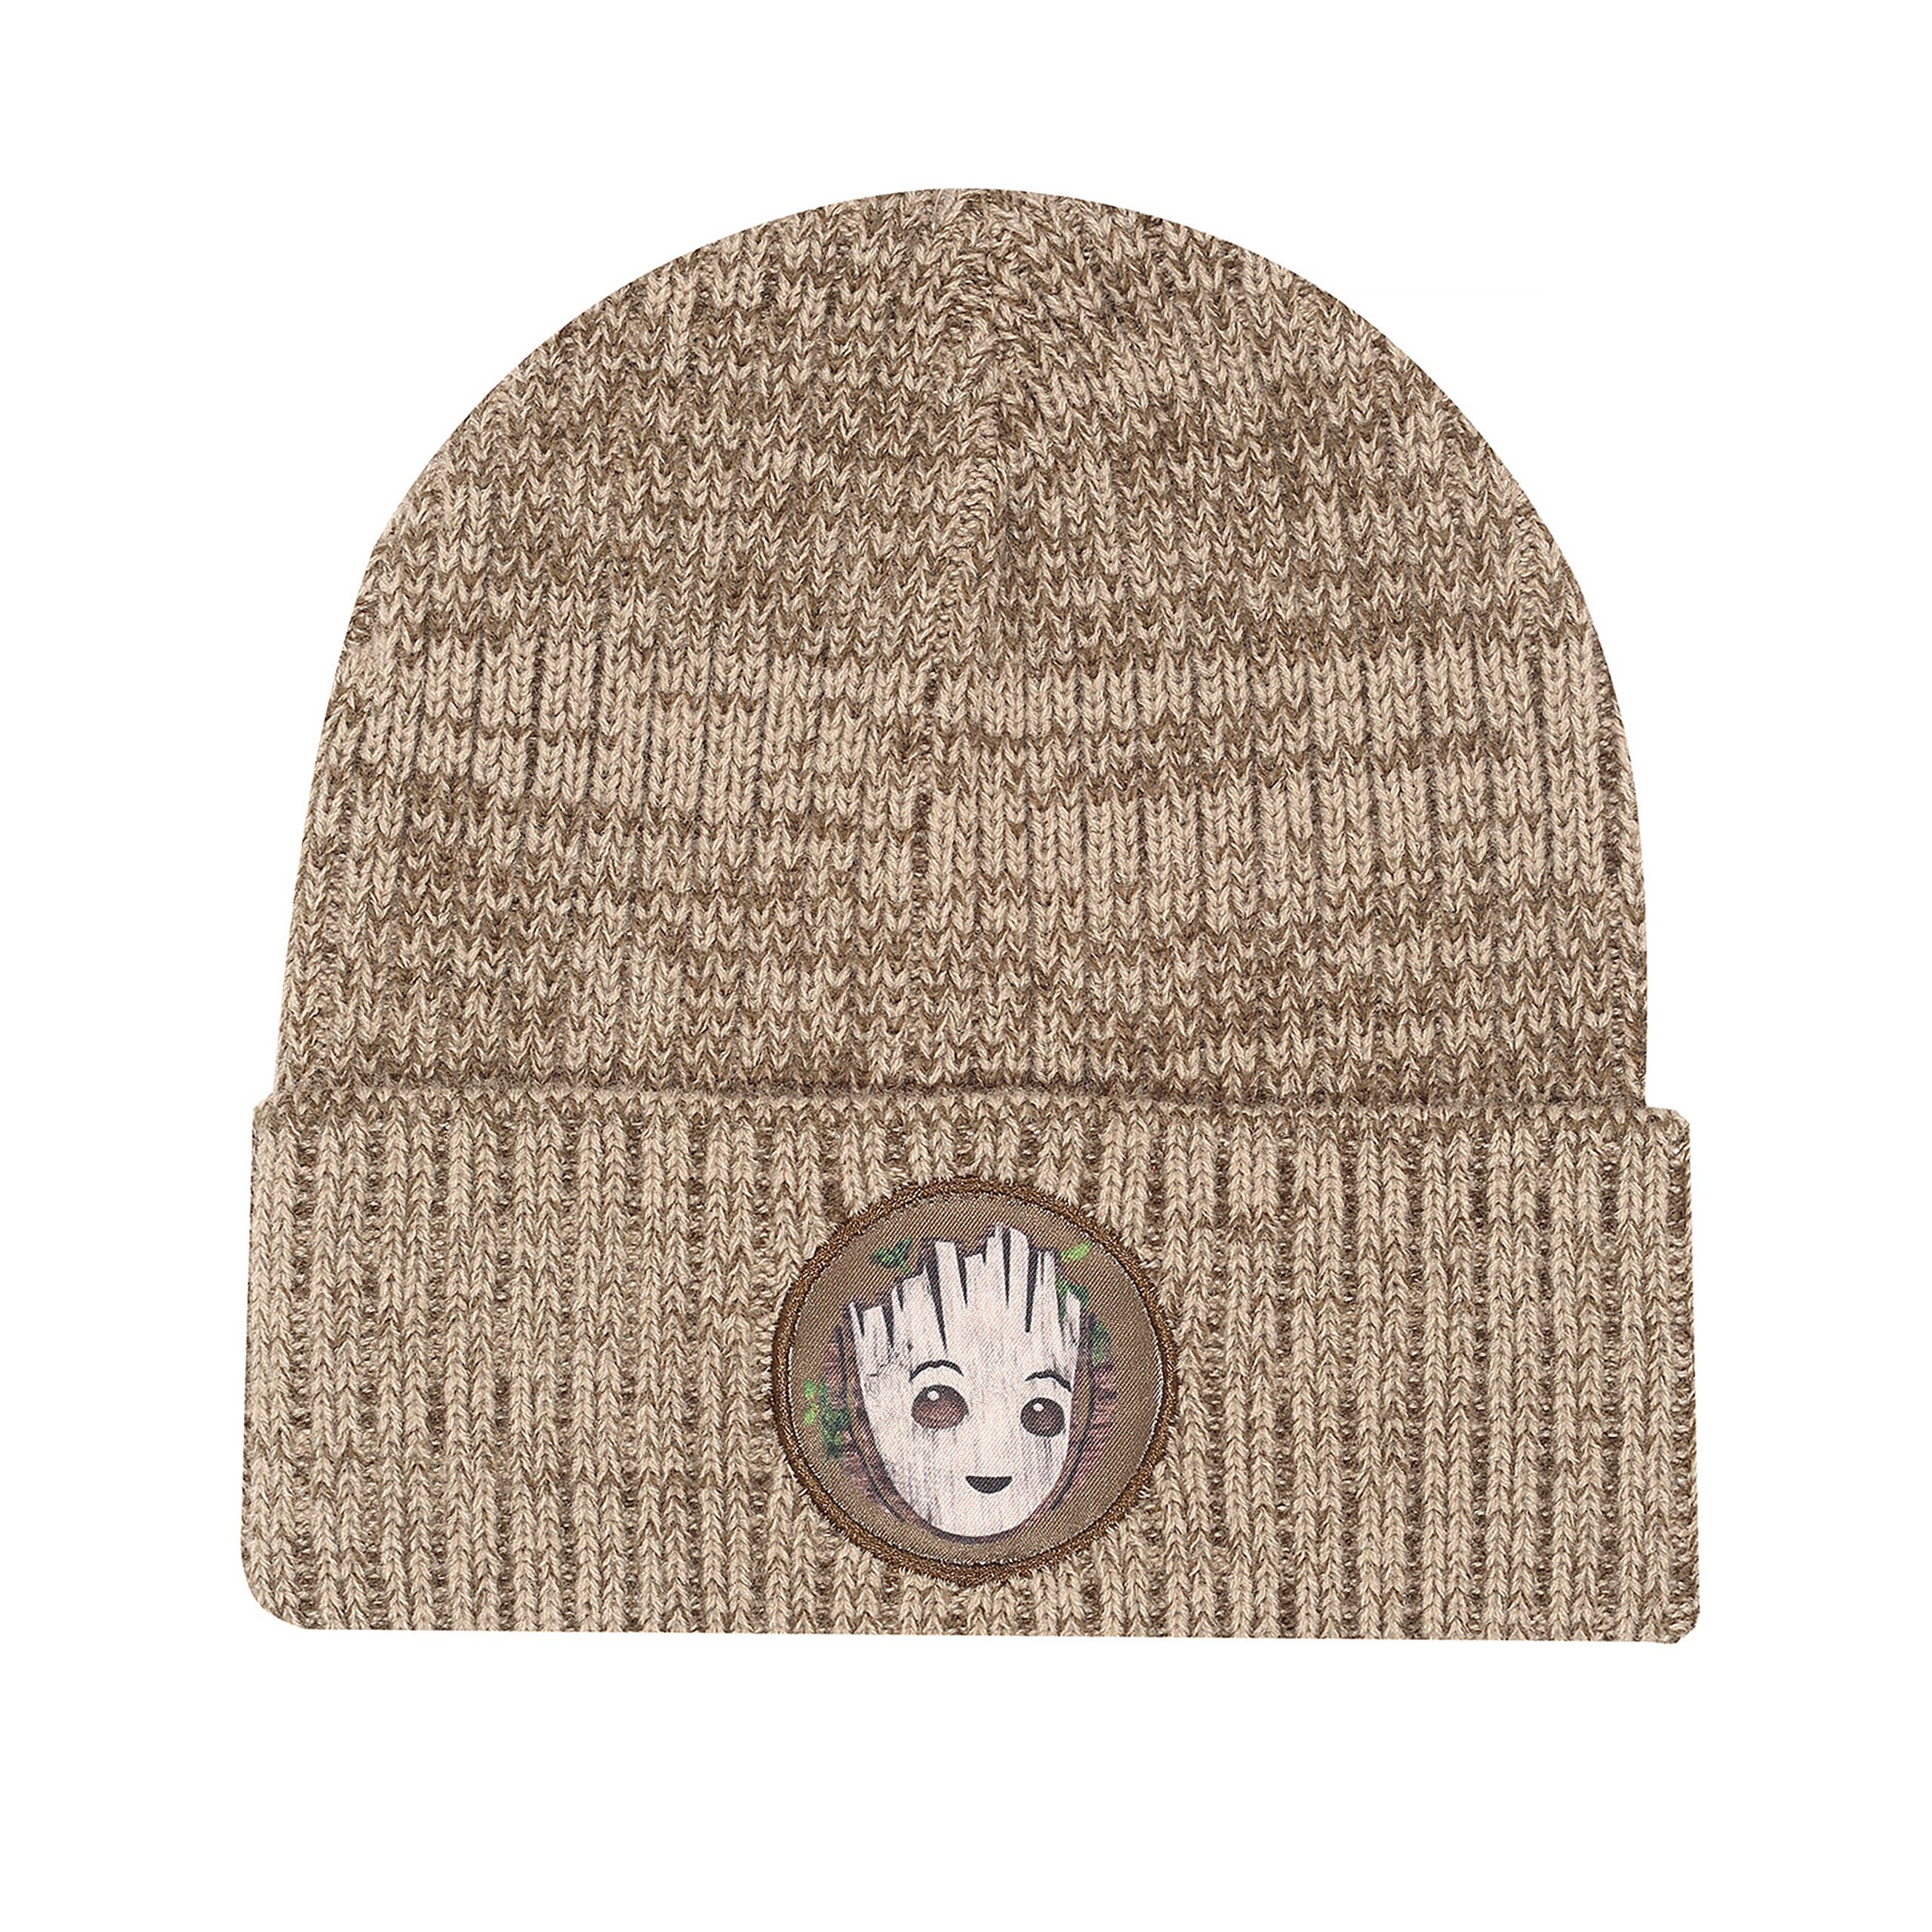 Guardians of the Galaxy - Baby Groot Hat